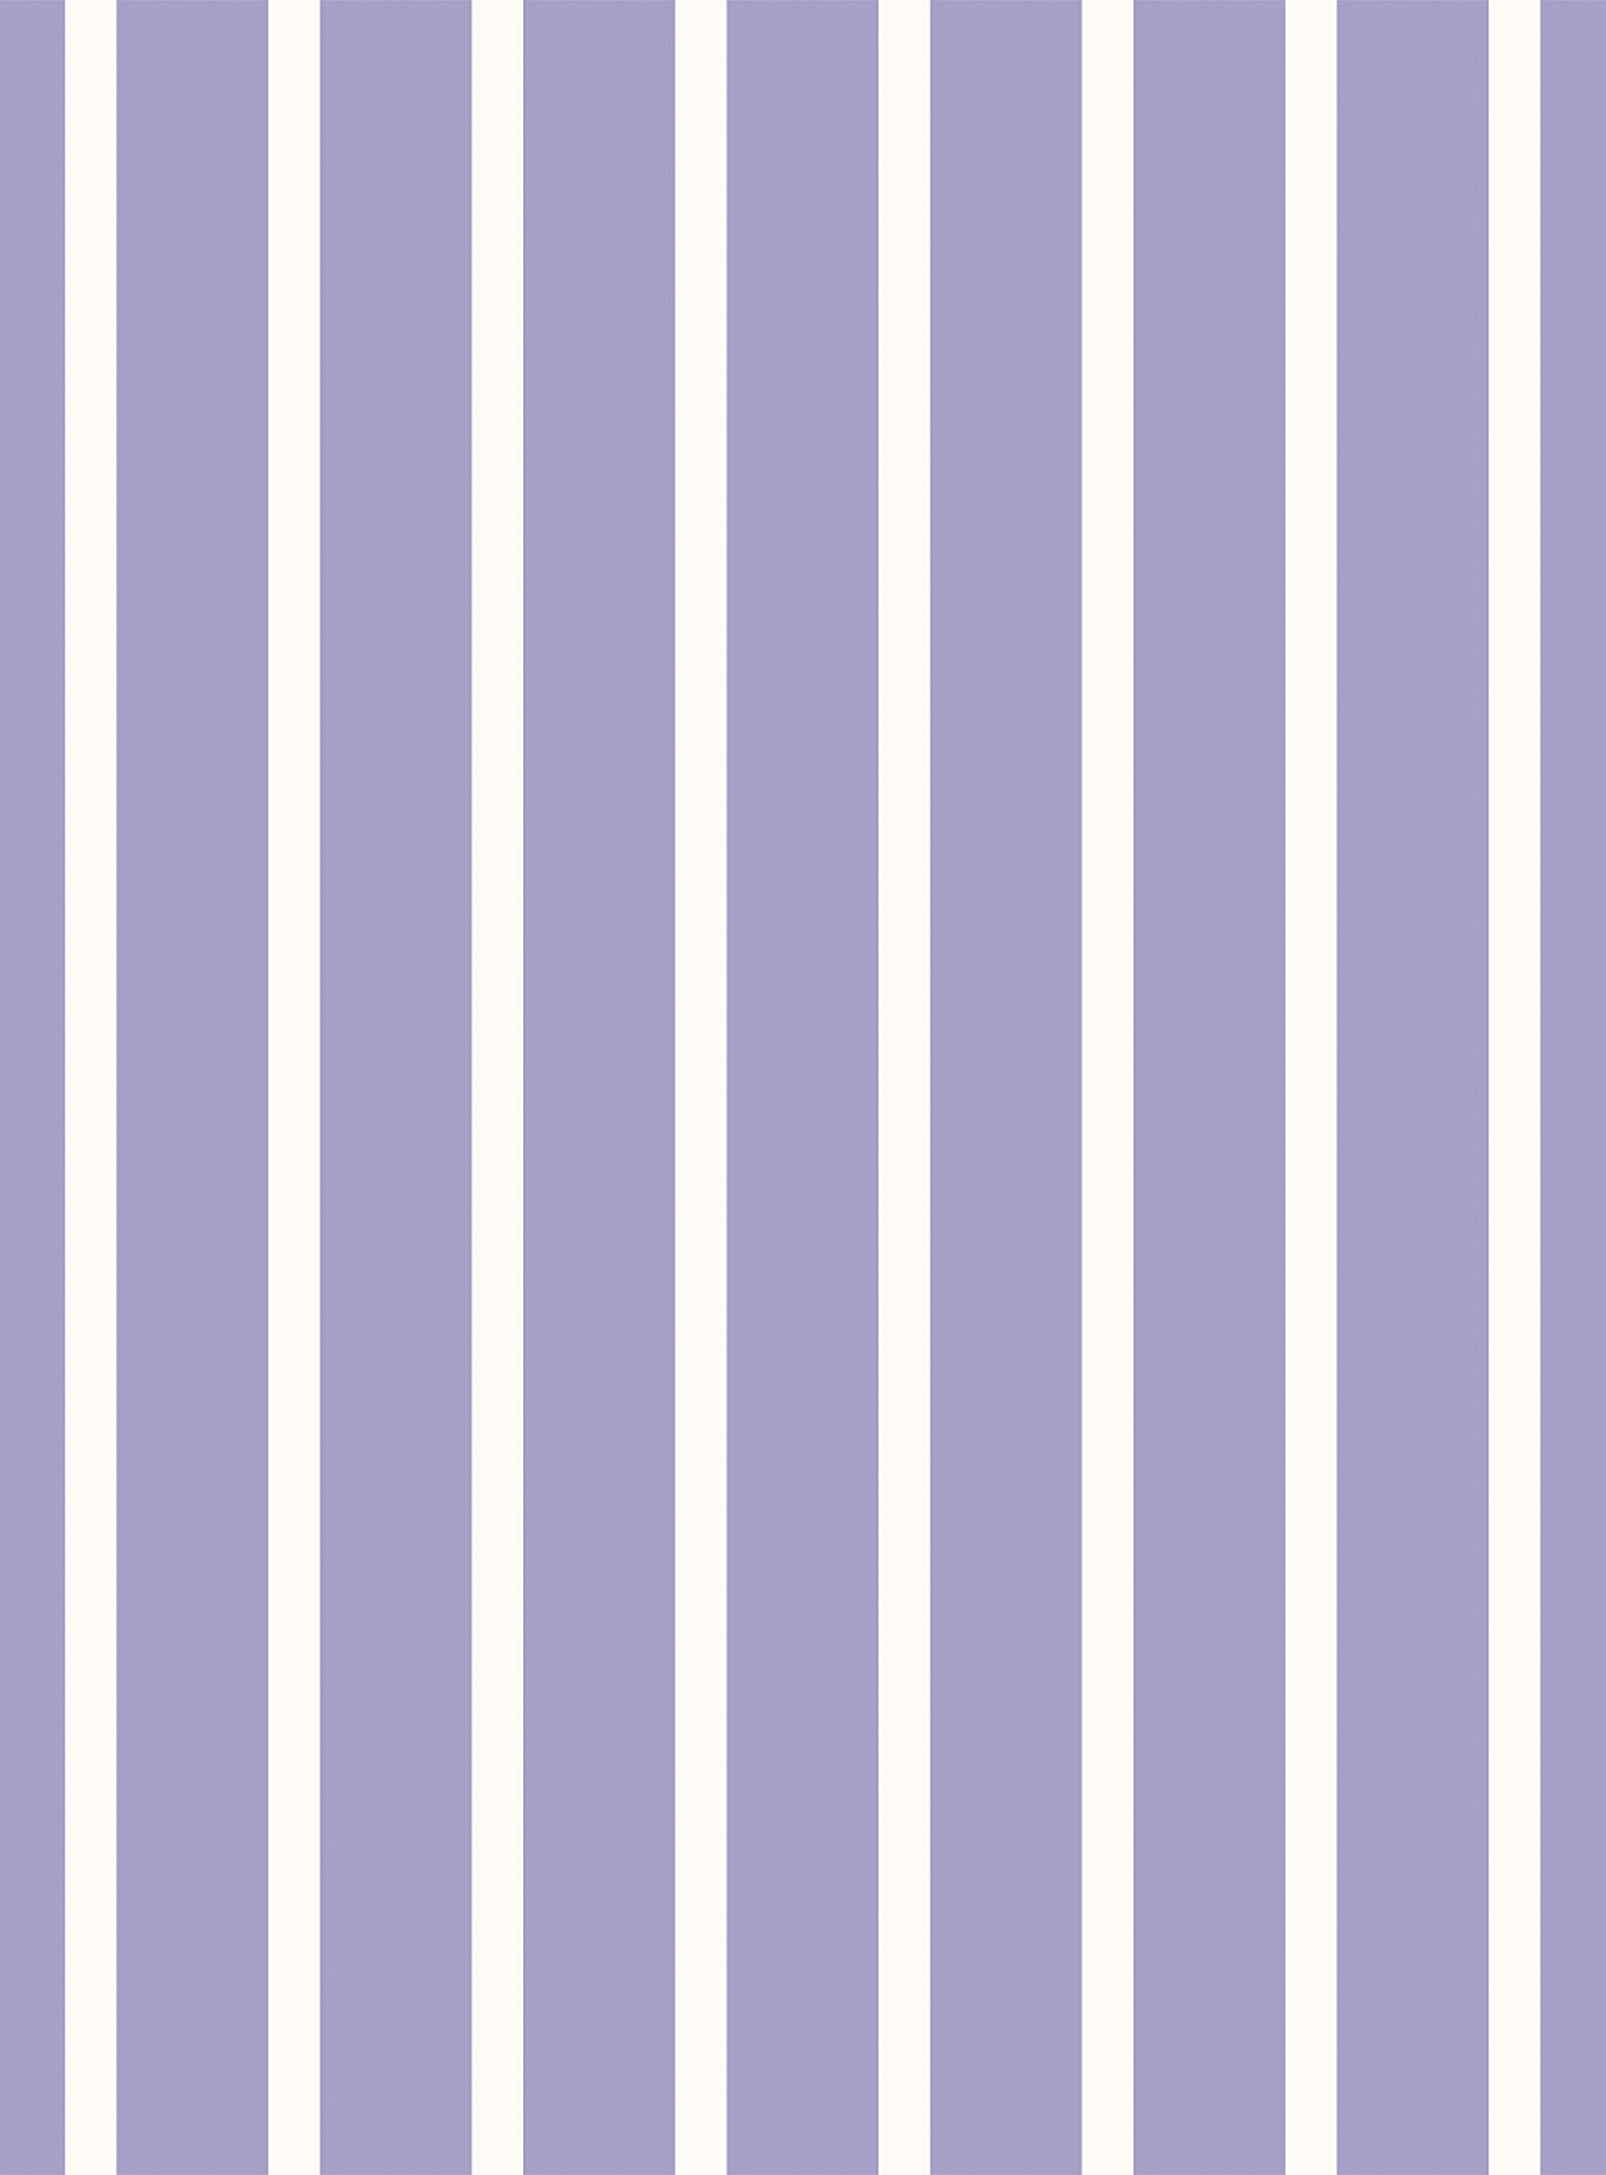 Station D Gelato Striped Wallpaper Strip See Available Sizes In Lilacs